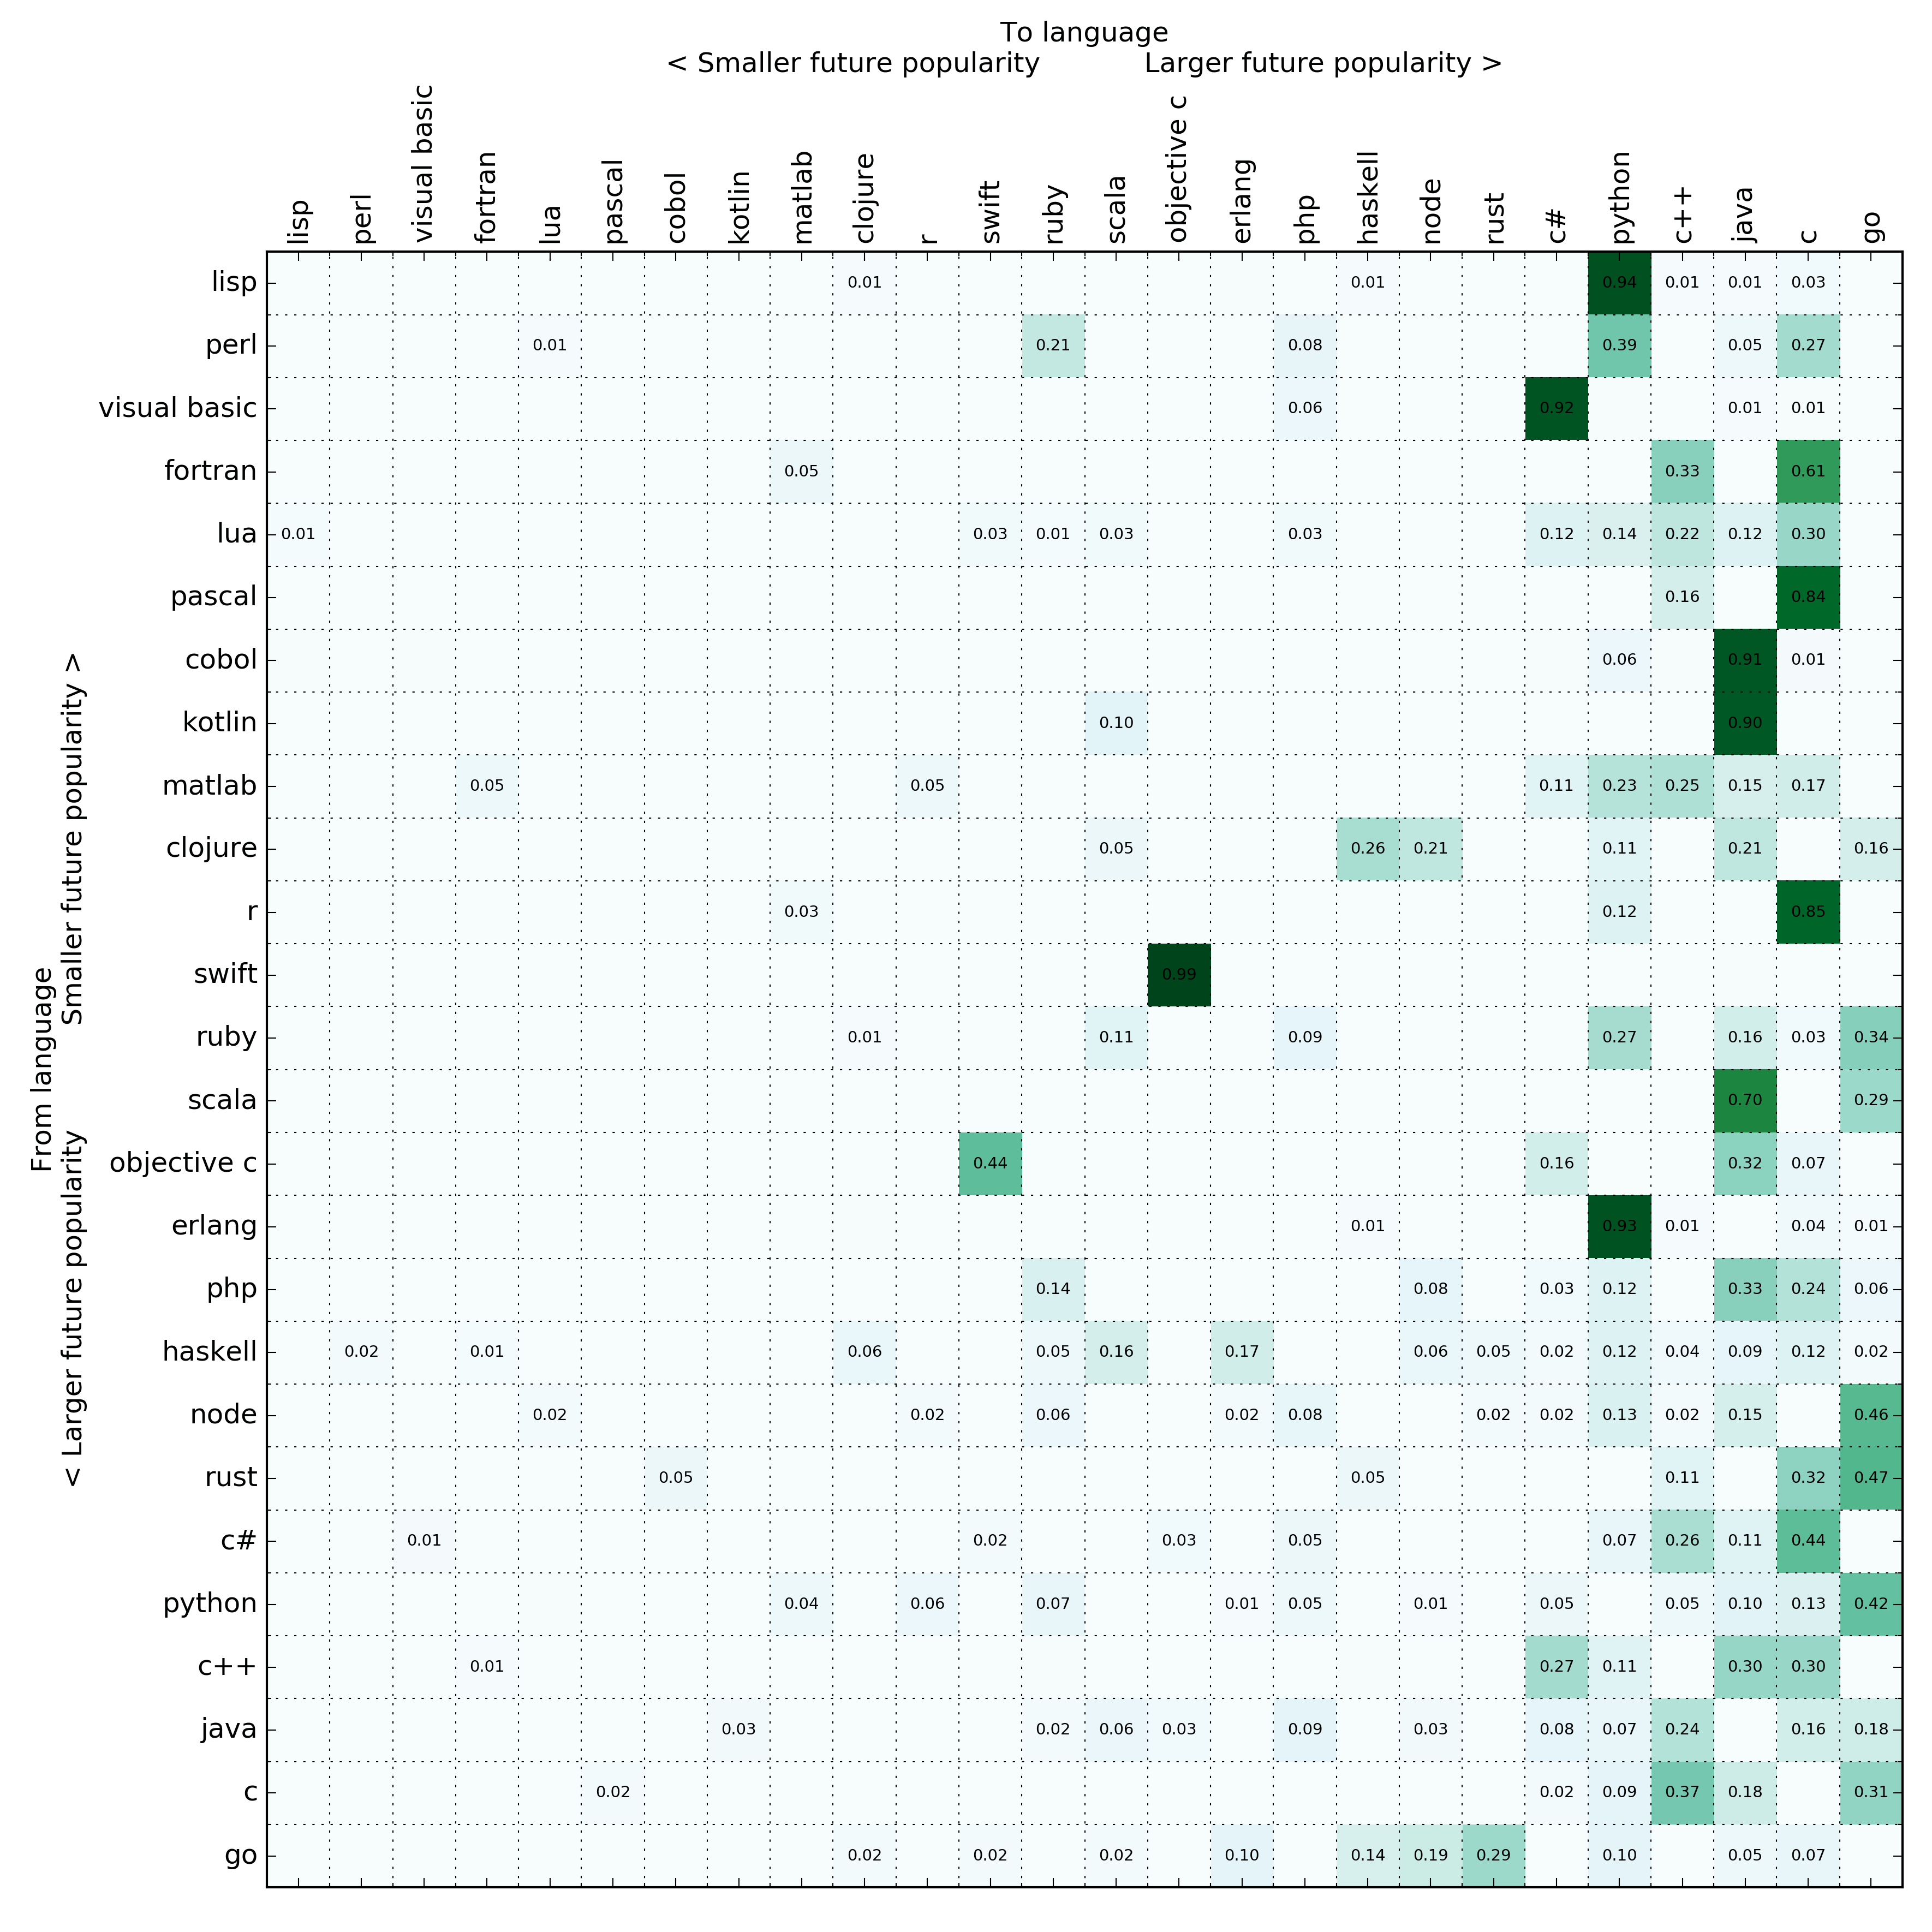 contingency table sorted by eigenvector